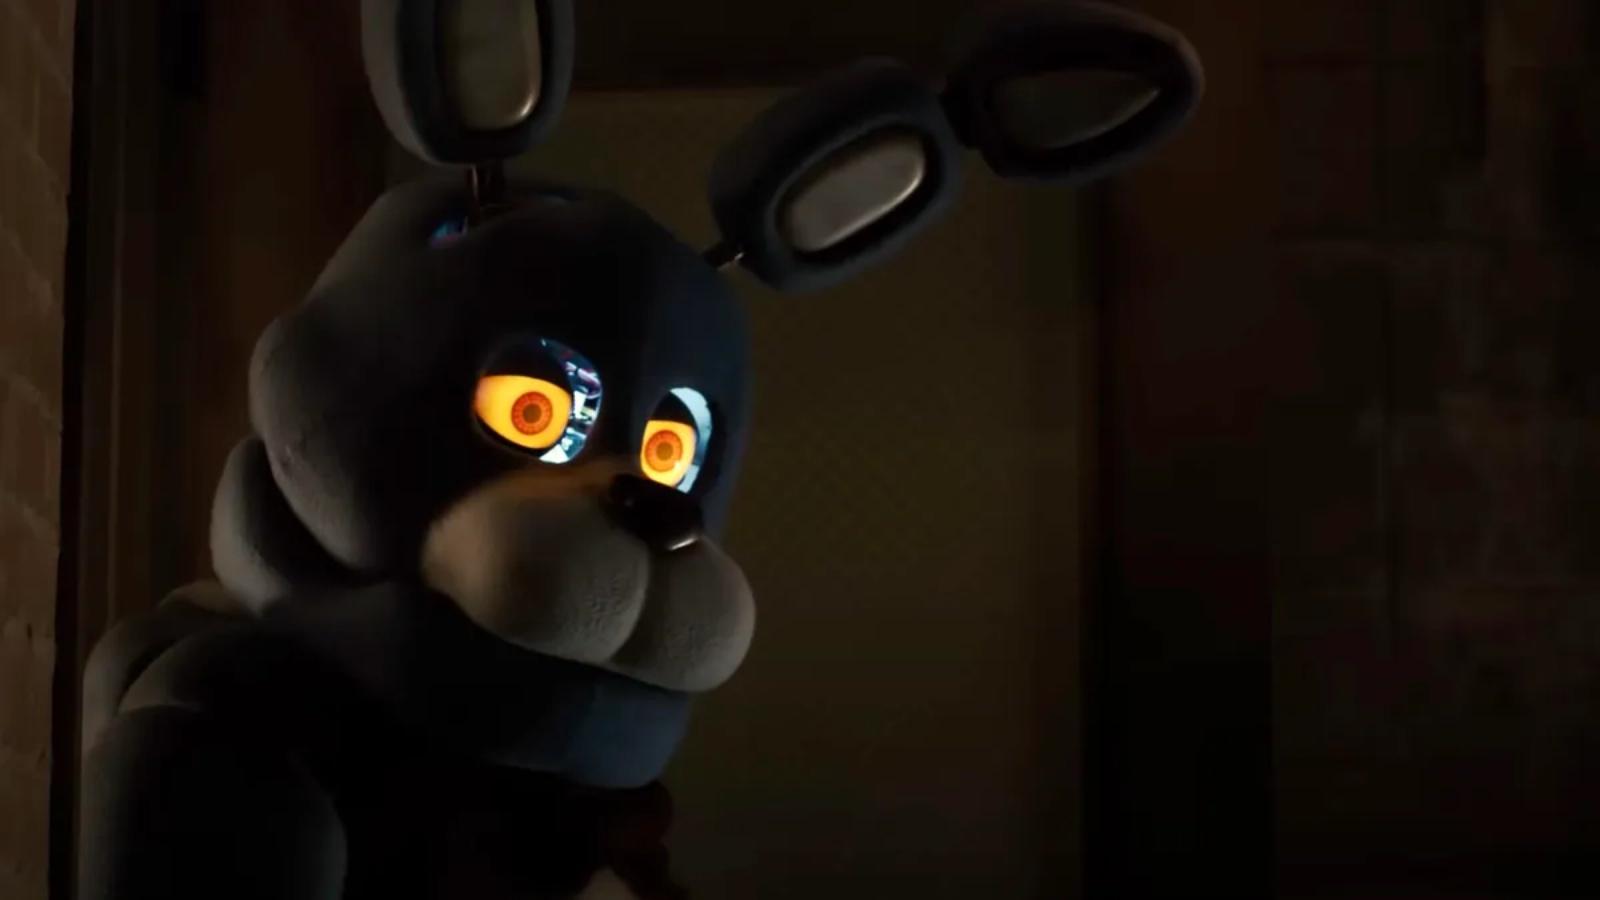 Five Nights at Freddy's, Synopsis